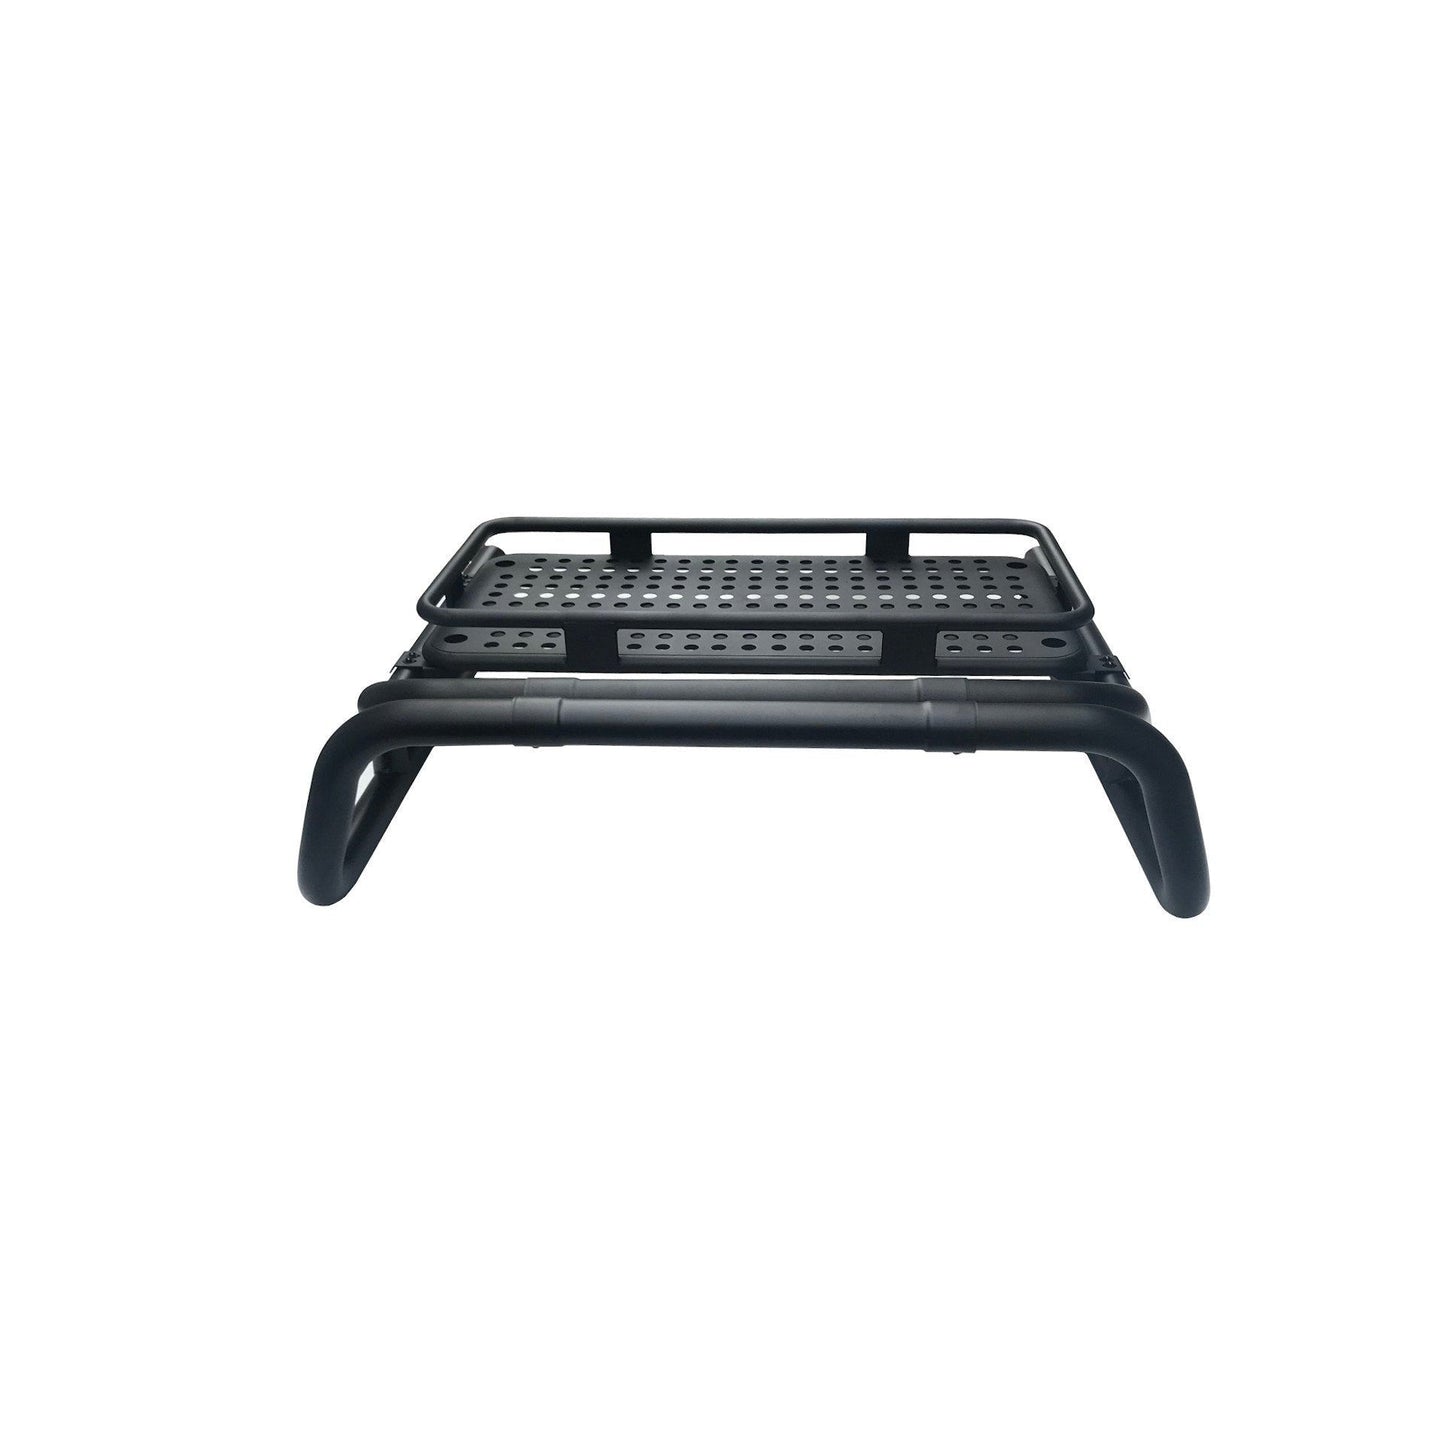 Black SUS201 Long Arm Roll Bar with Cargo Basket Rack for the Mercedes X-Class